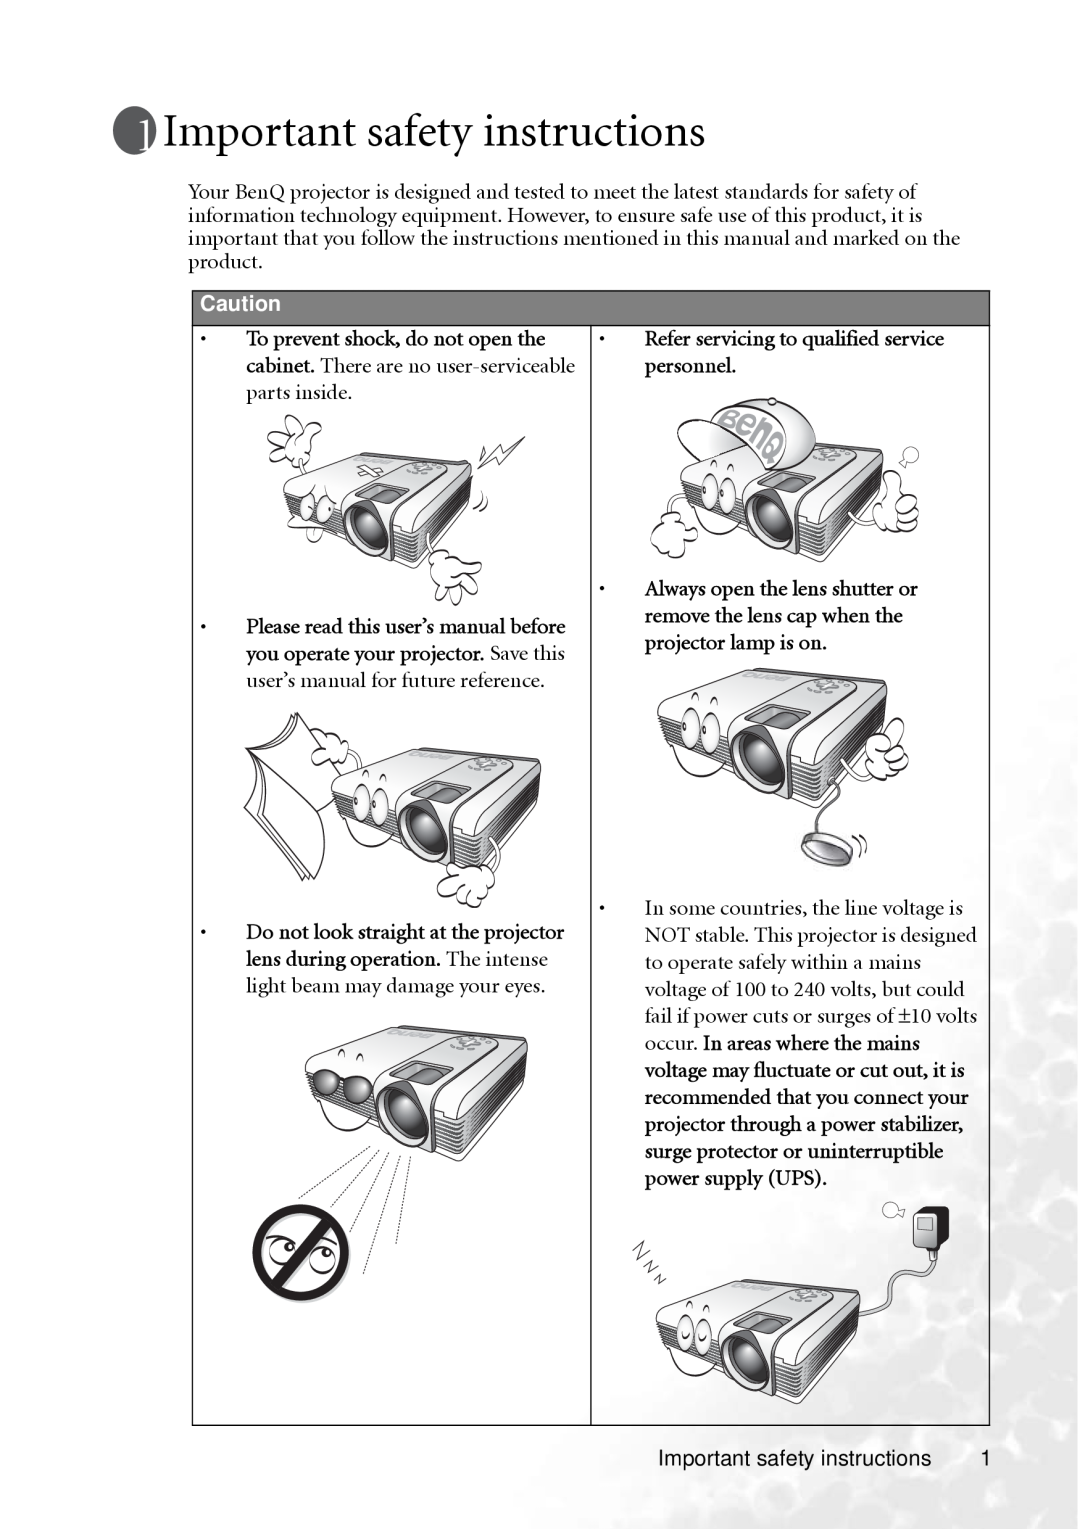 BenQ PB8260 user manual Important safety instructions, Refer servicing to qualified service personnel 